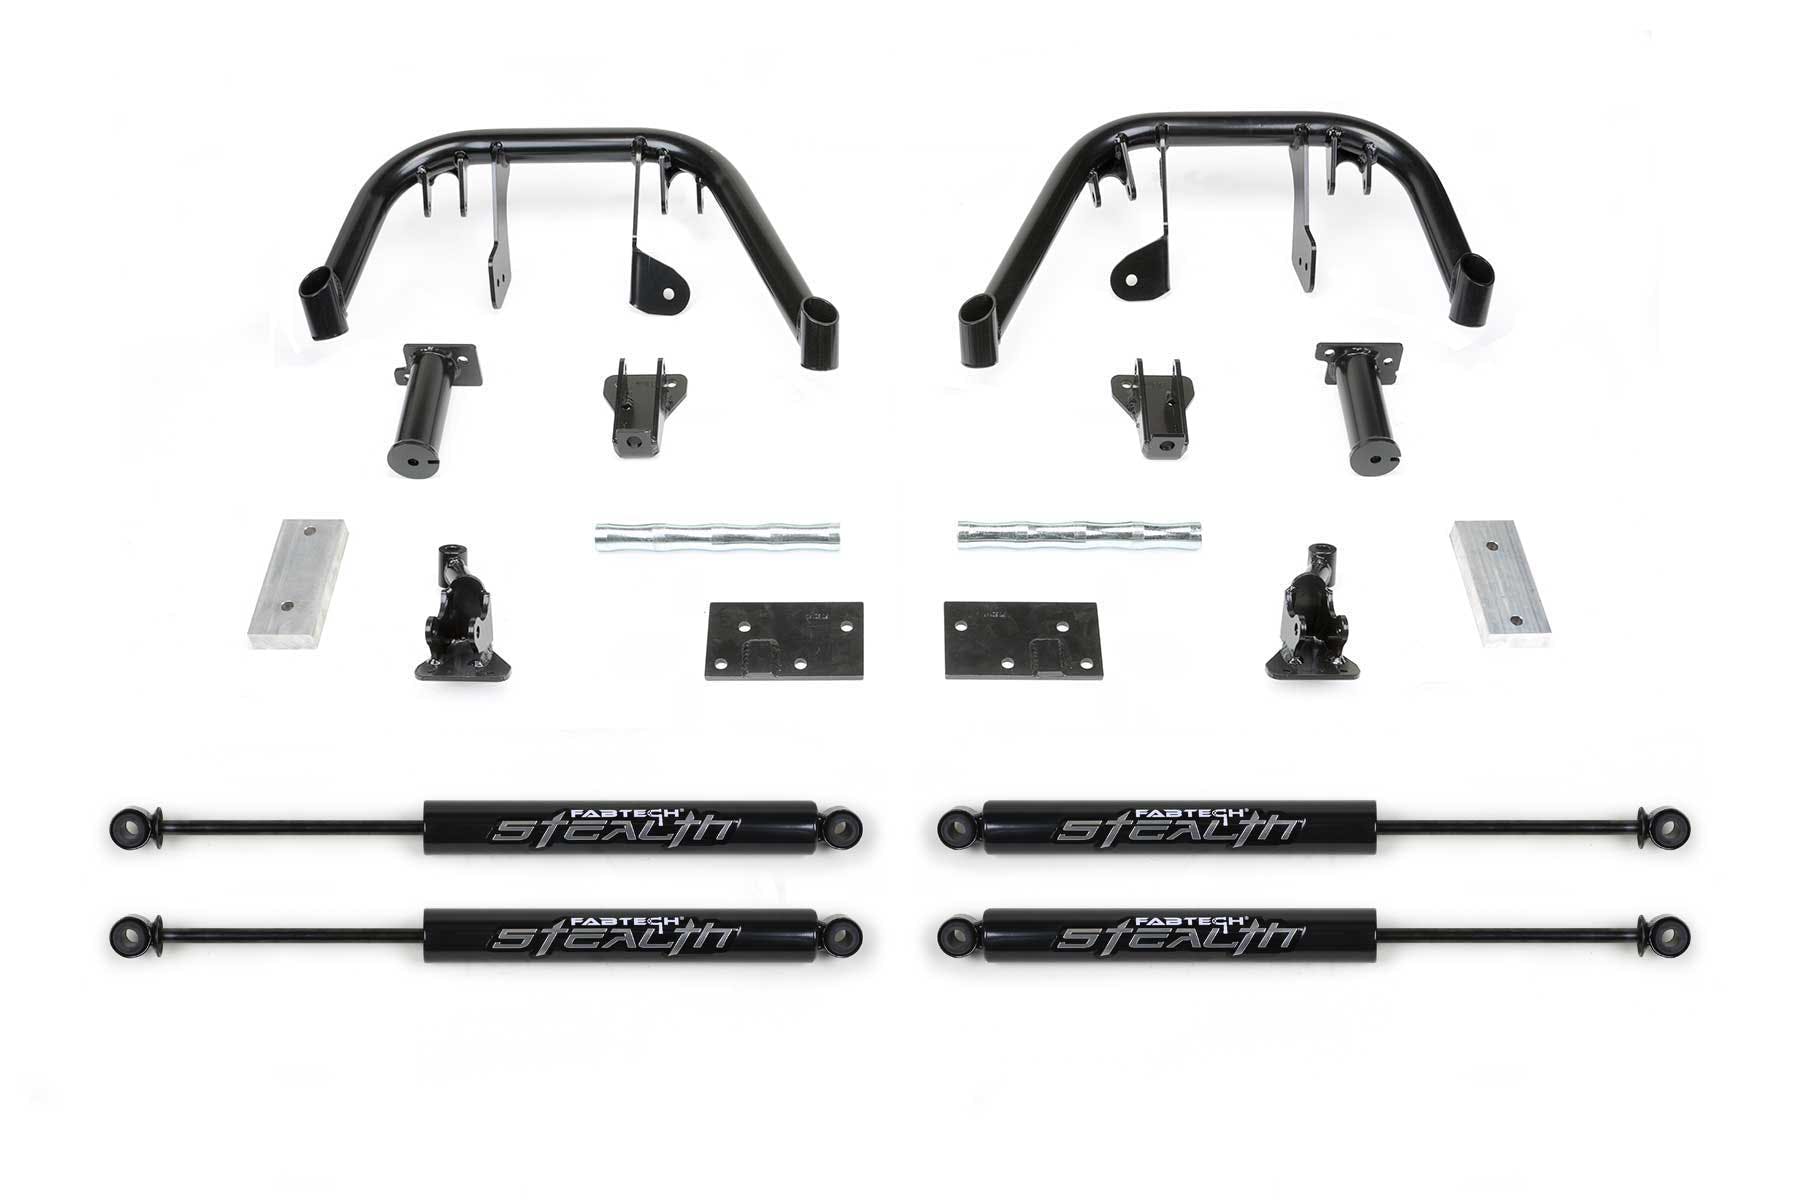 Fabtech K2081M 8in. MULTIPLE FRT SHK SYS W/STEALTH 05-07 FORD F250/350 4WD